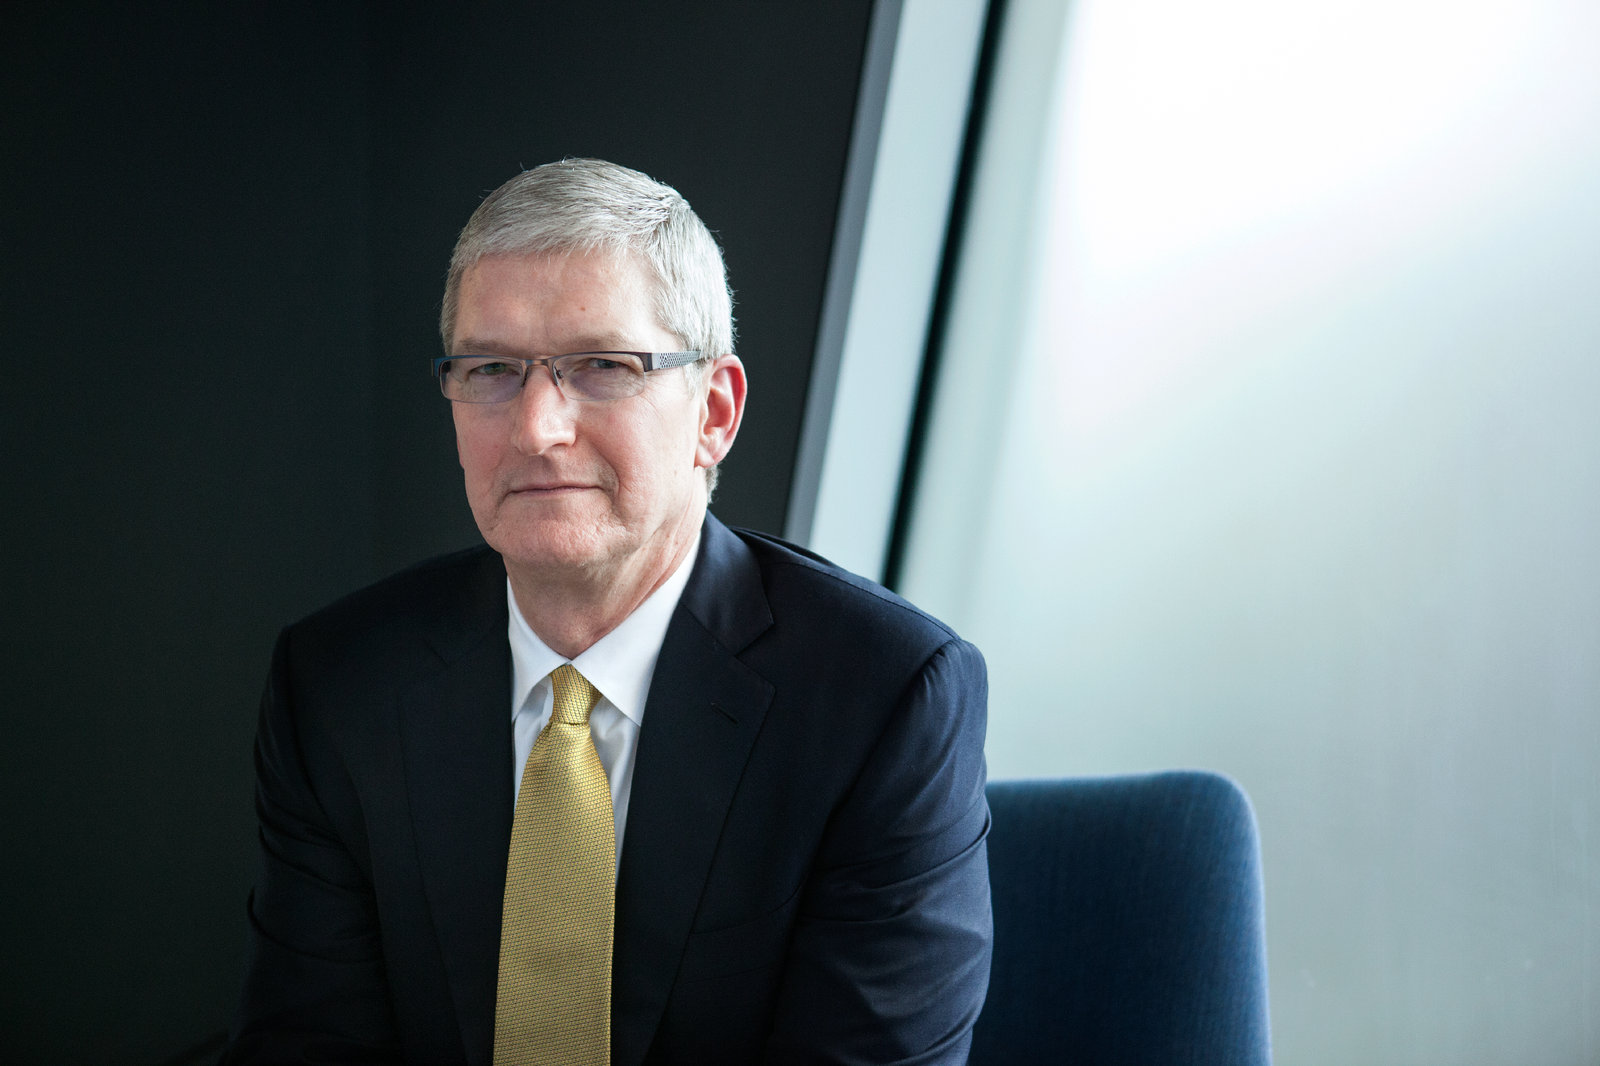 Tim Cook pockets an additional $ 3.6 million from the sale of Apple shares